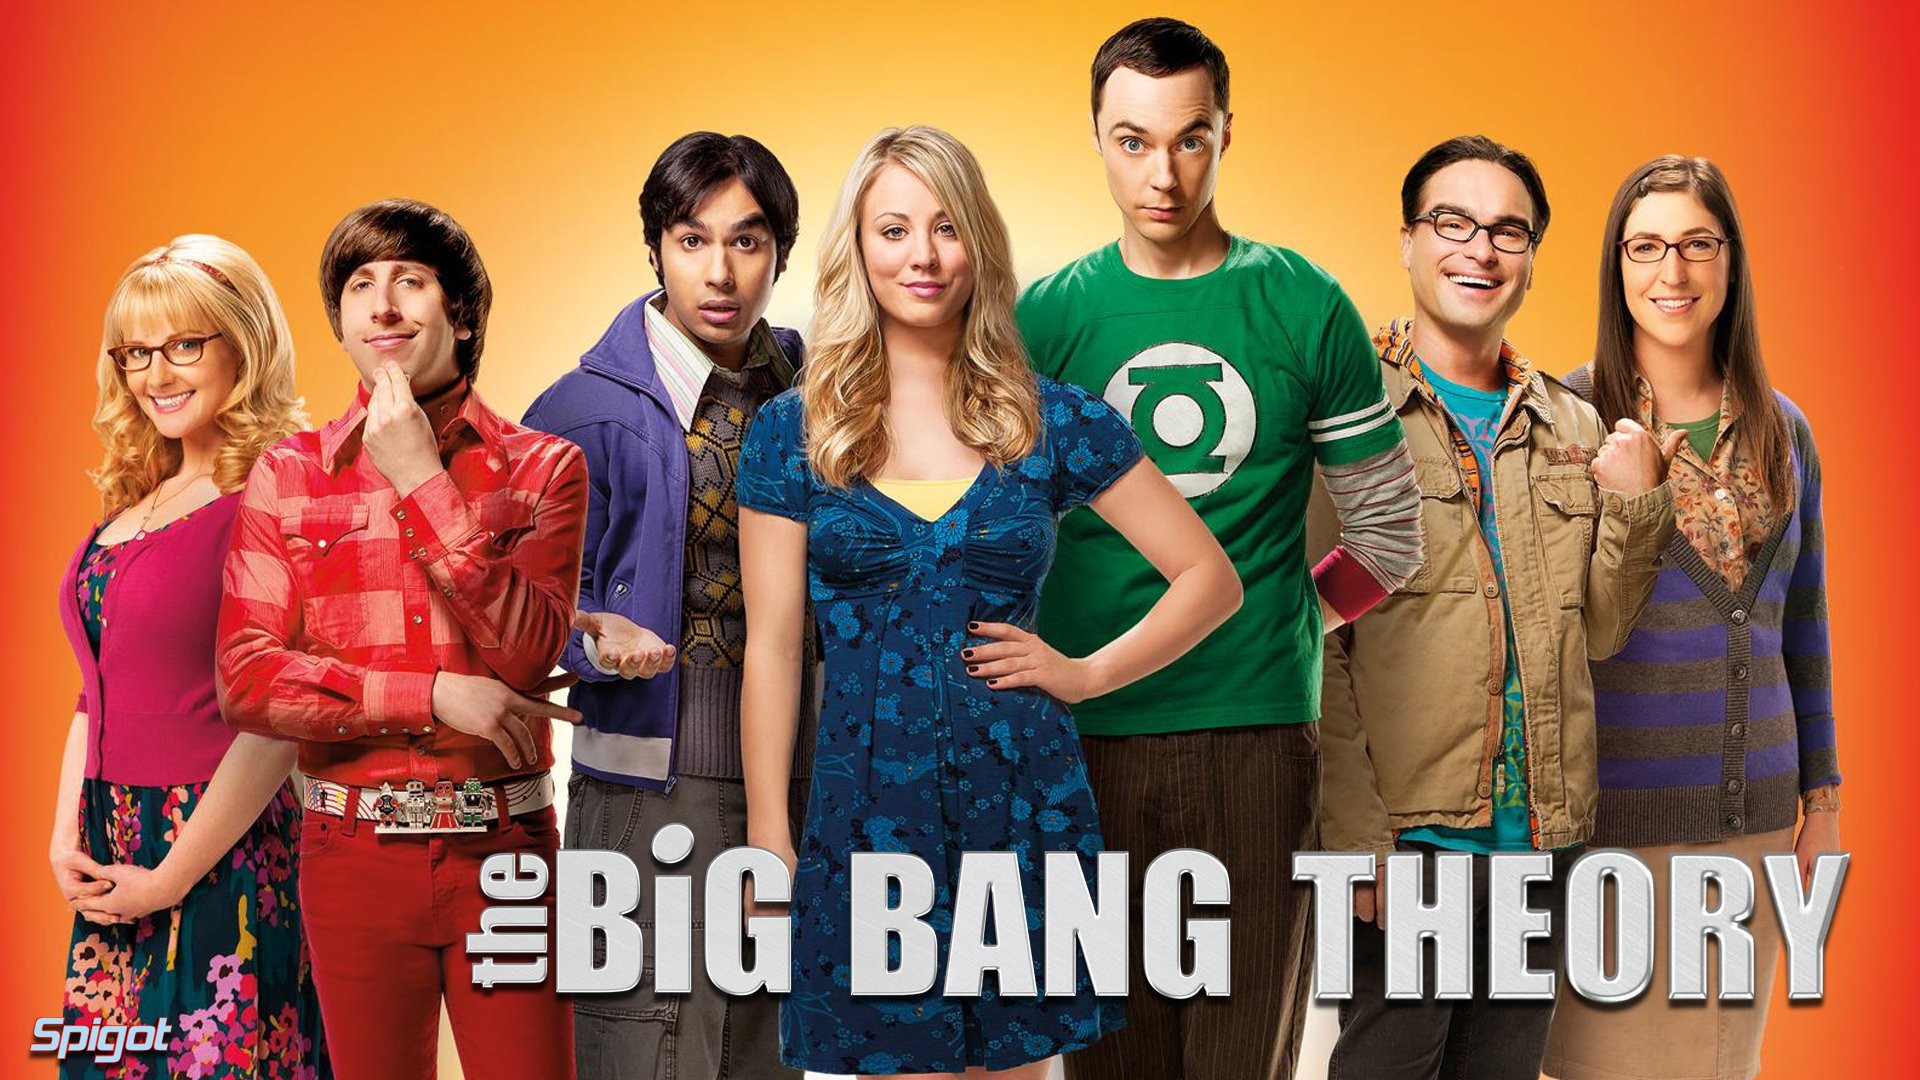 1920x1080 Fernsehserien - The Big Bang Theory Cast Penny (The Big Bang Theory)  Melissa Rauch